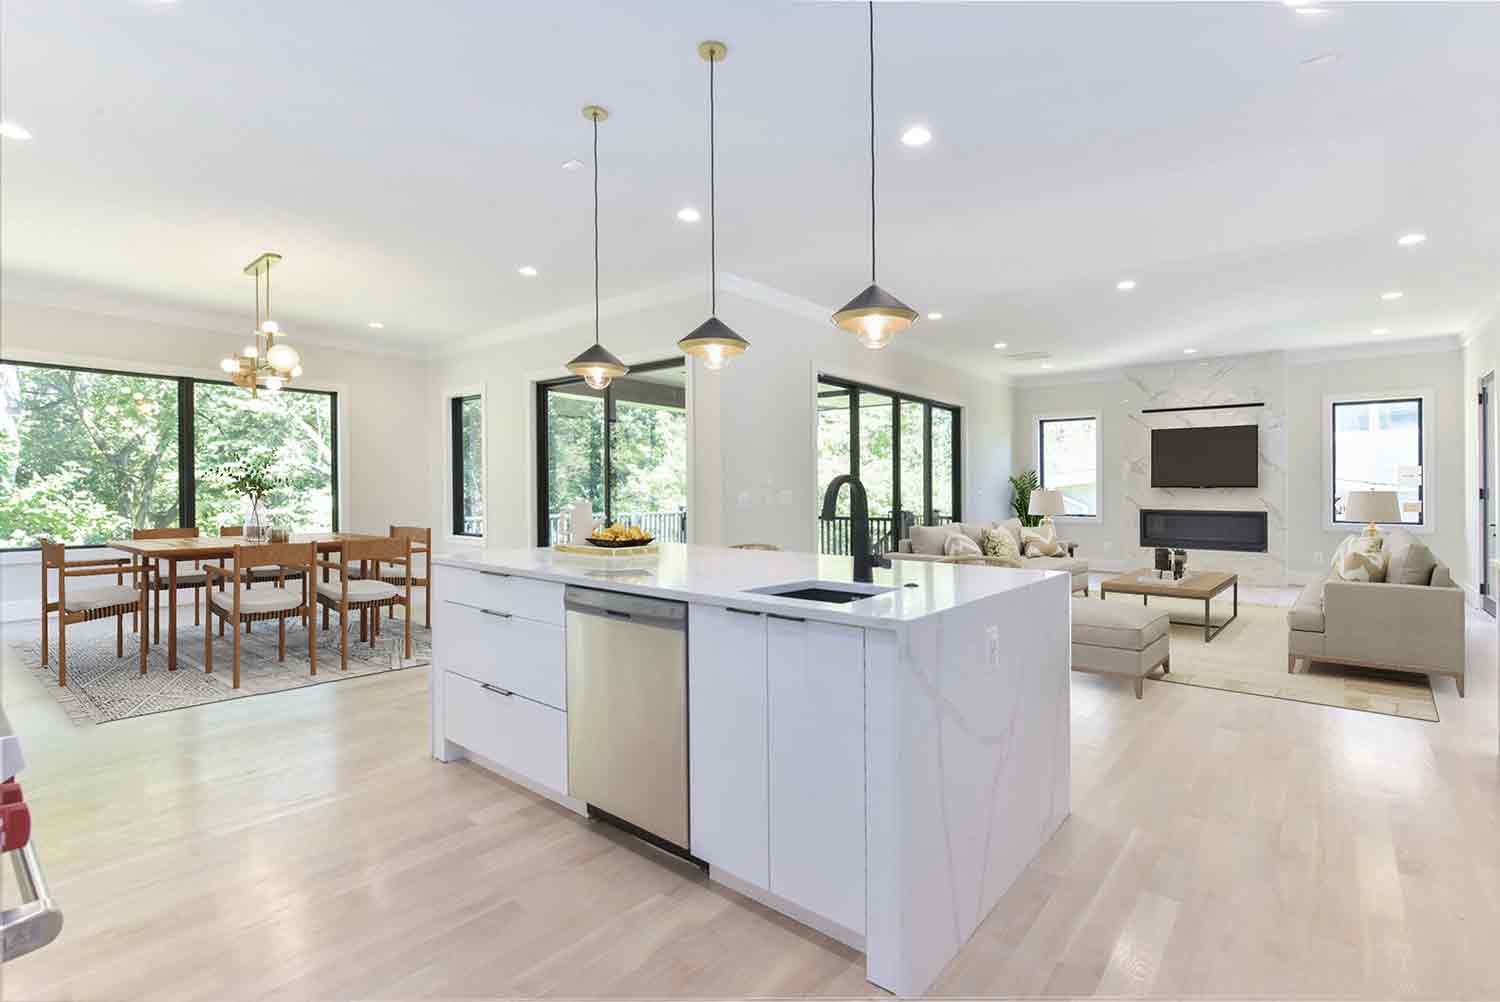 Kitchen island and open living area of custom home builder in Kensington MD